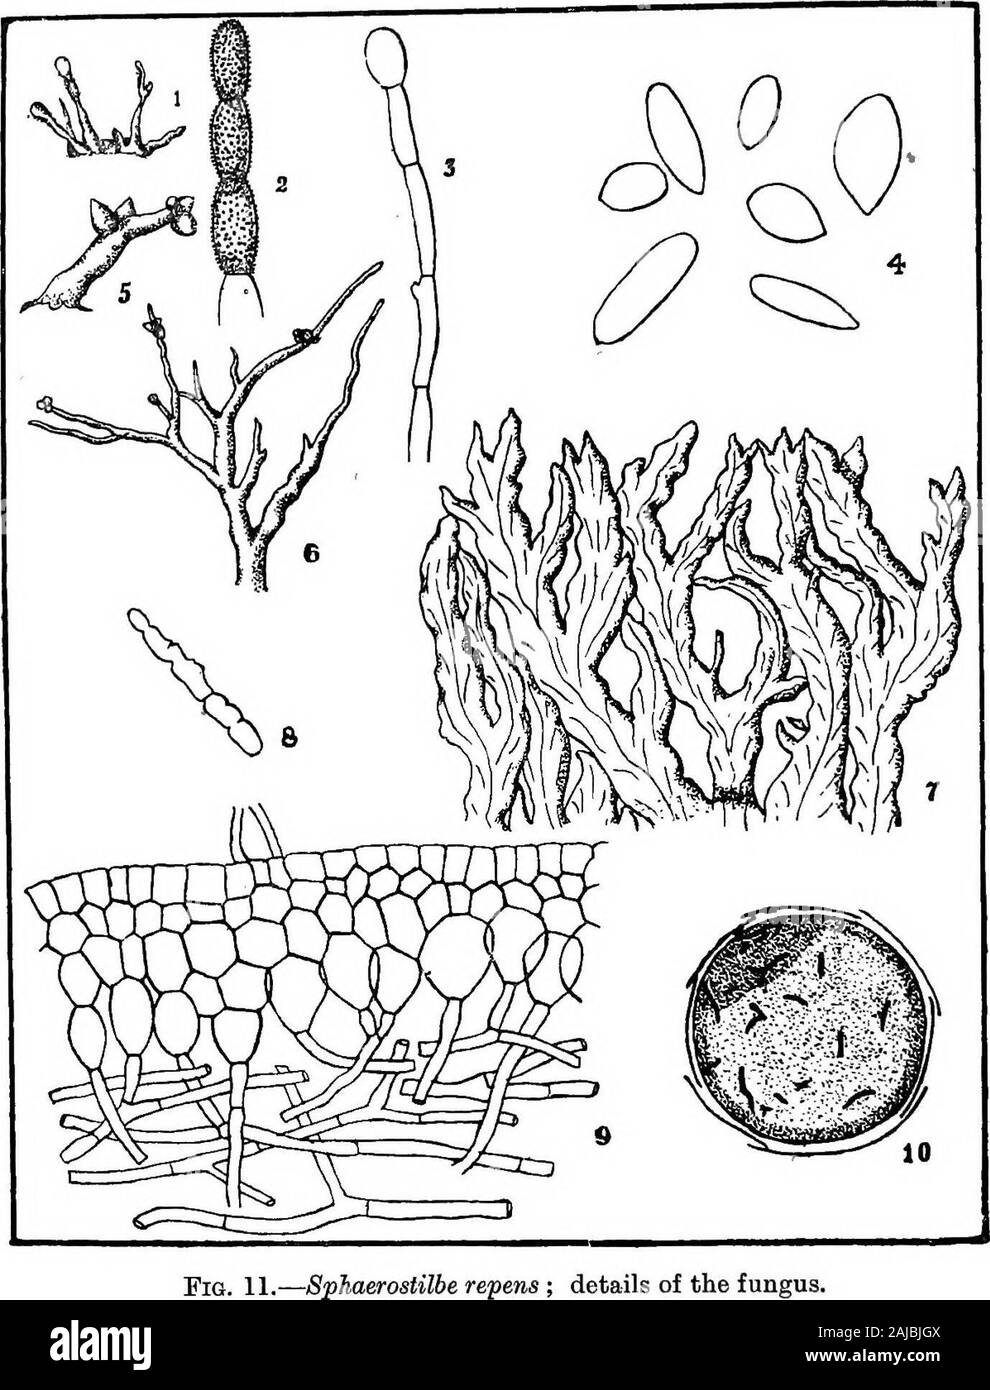 The diseases and pests of the rubber tree . enter. As previously stated, the fungus develops freely on smallpieces of Jak wood, and it has been found to spread to Heveafrom decaying Jak stumps. In this respect it resemblesFomes lignosus, and provides an additional reason for theremoval of Jak stumps. It also occurs on felled Dadap logs,and has been found to cause root disease of Derris robusta, sothat it is probable that it may attack members of the orderLeguminosae in general. In the first case recorded the funguswas probably introduced with firewood, i.e. miscellaneousjungle timber. Dead tre Stock Photo